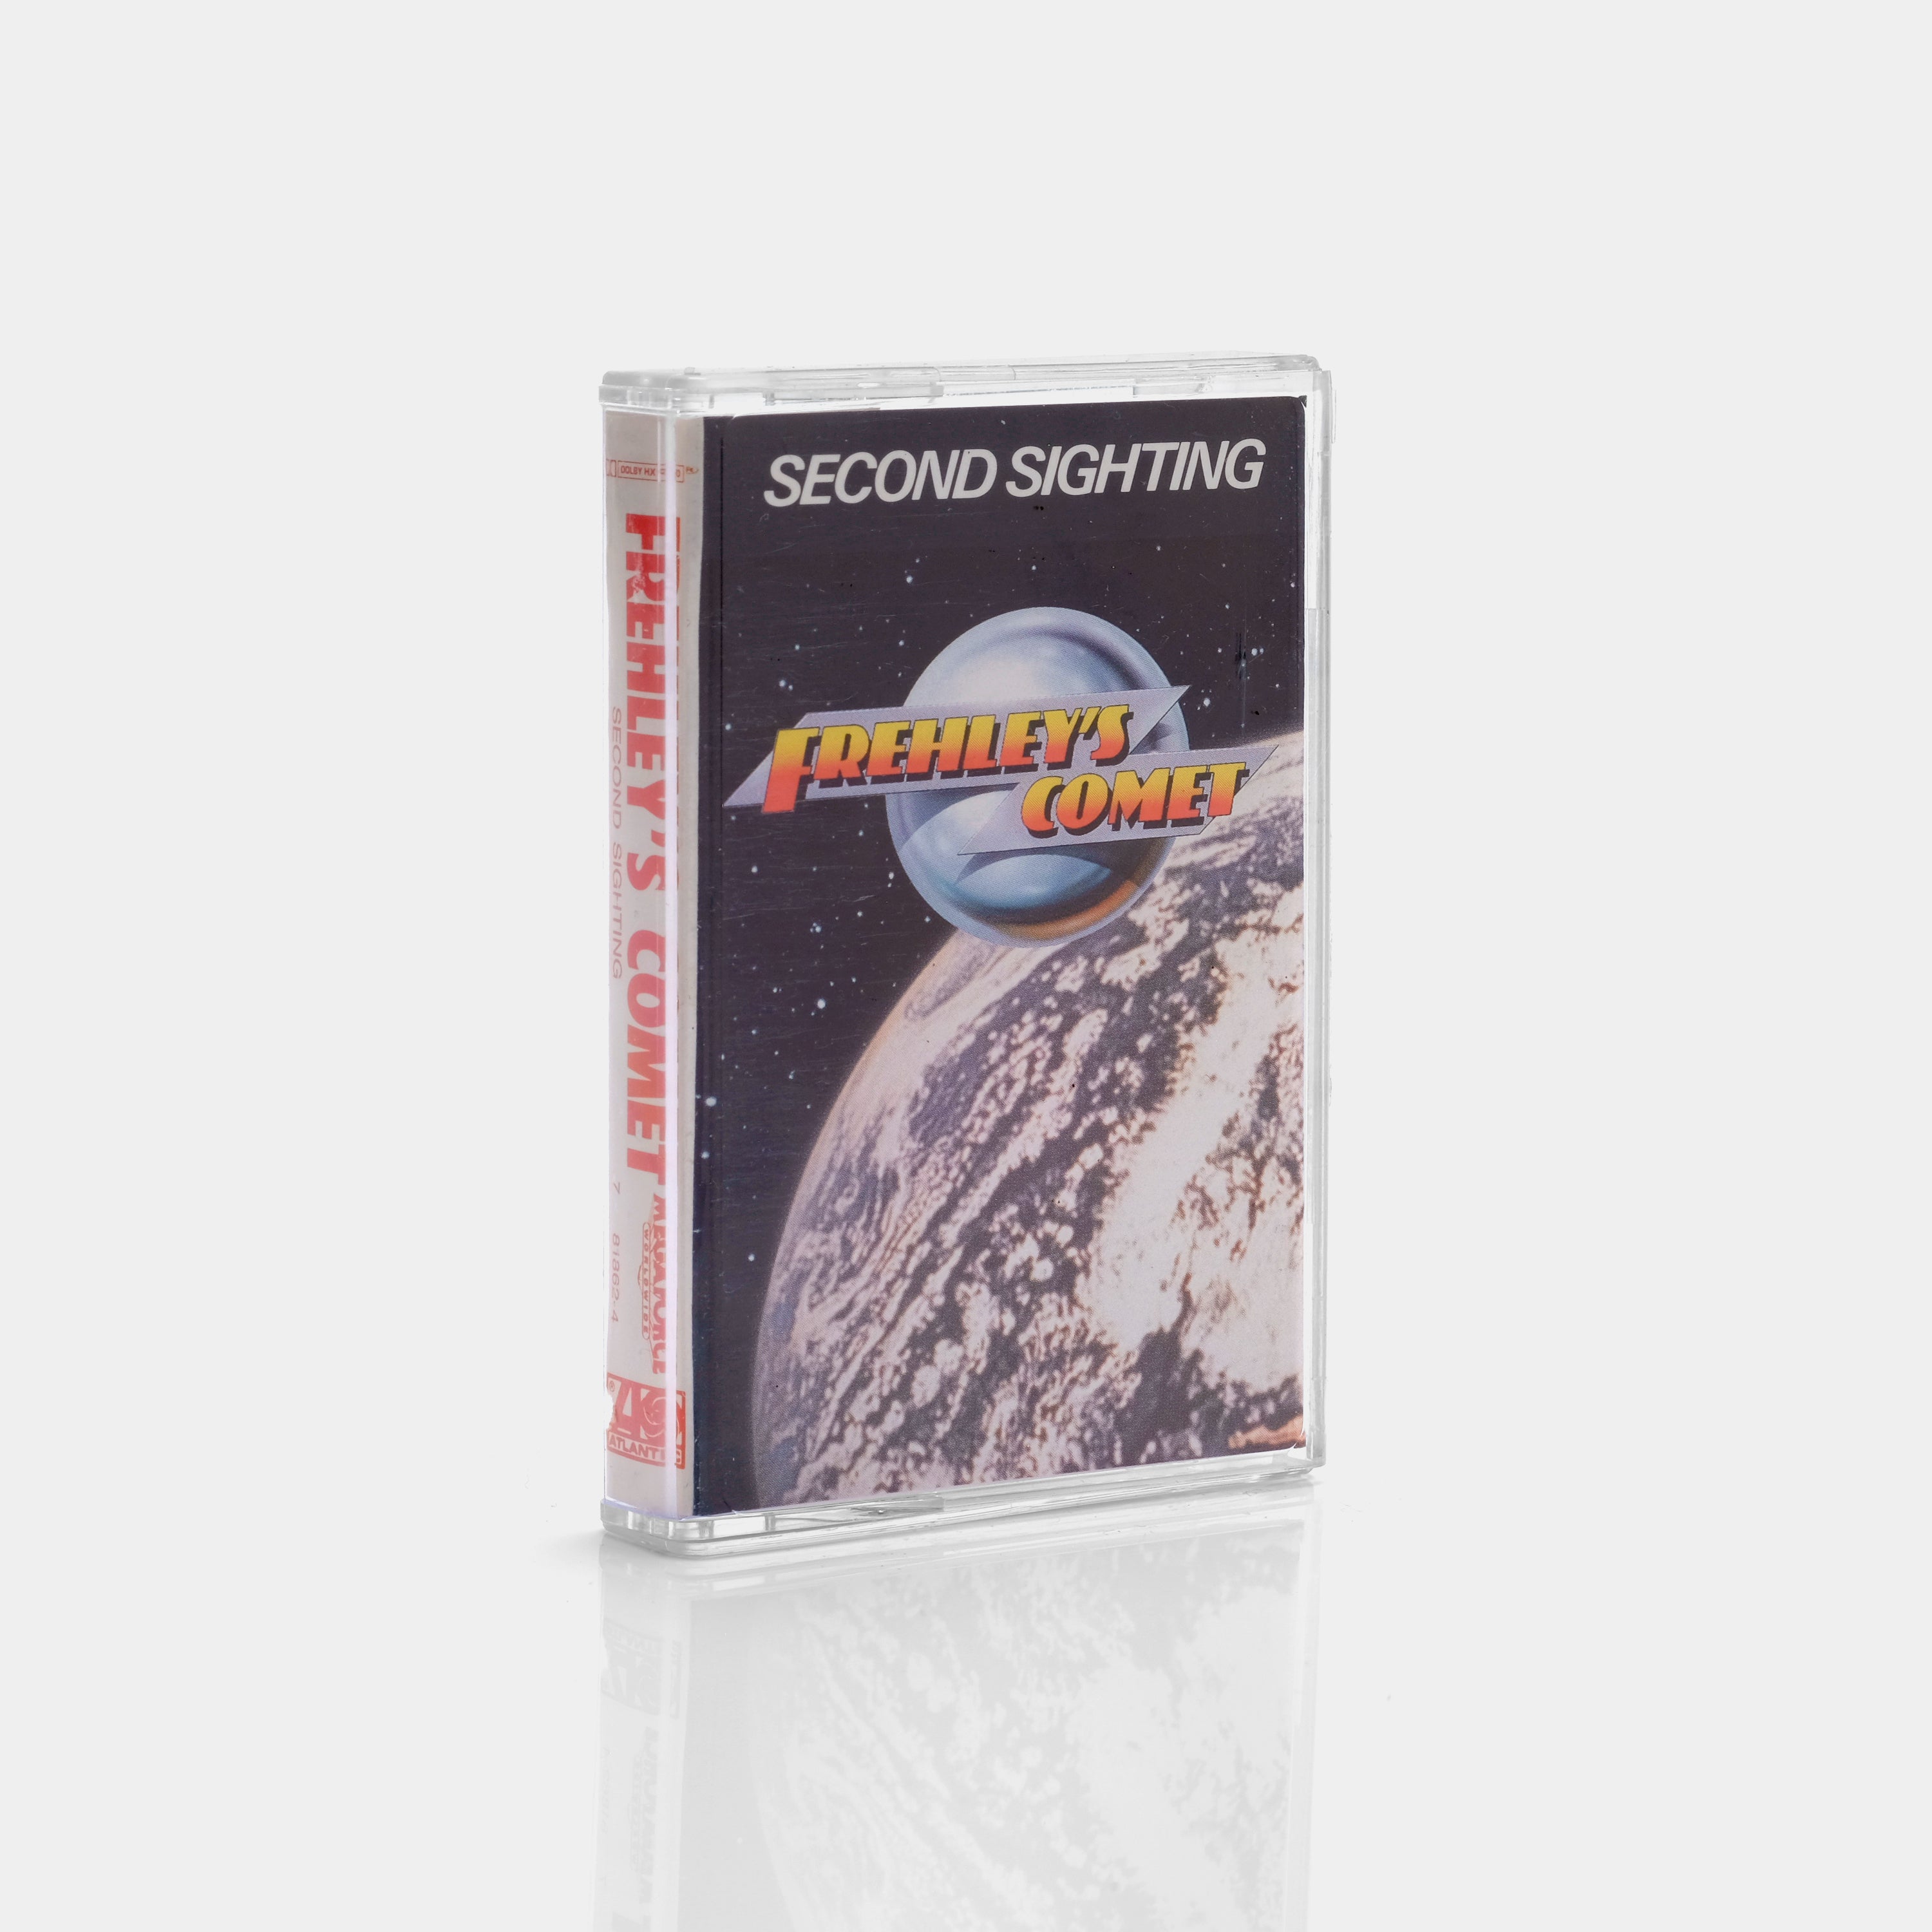 Frehley's Comet - Second Sighting Cassette Tape